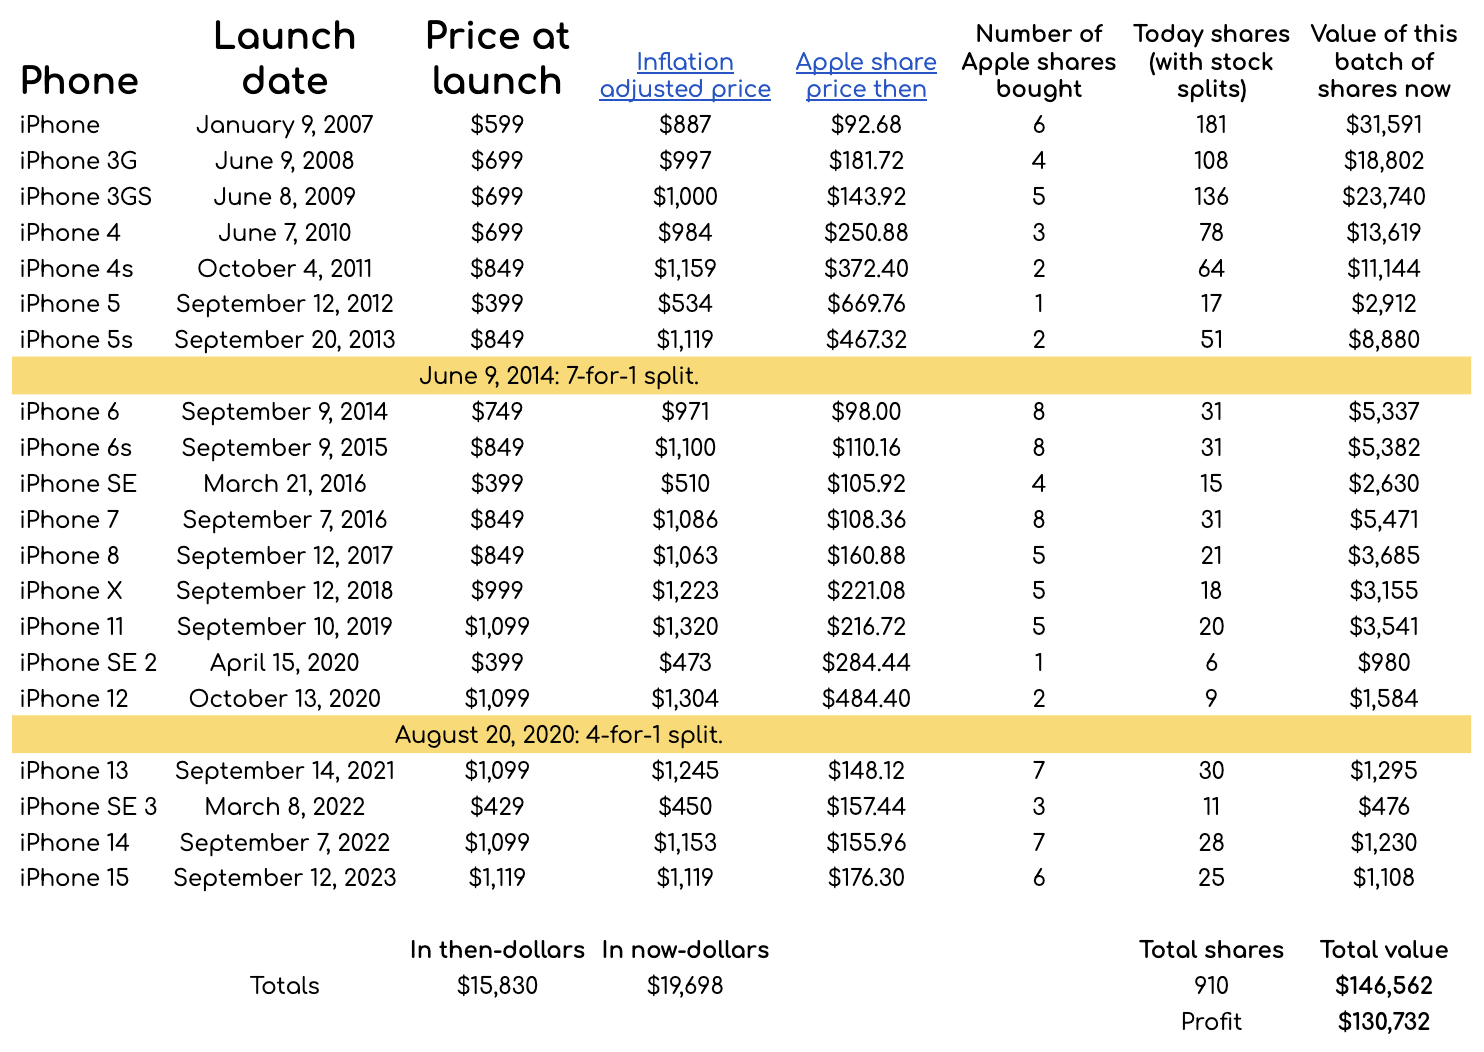 If you bought Apple stock instead of phones, you'd have $147,000